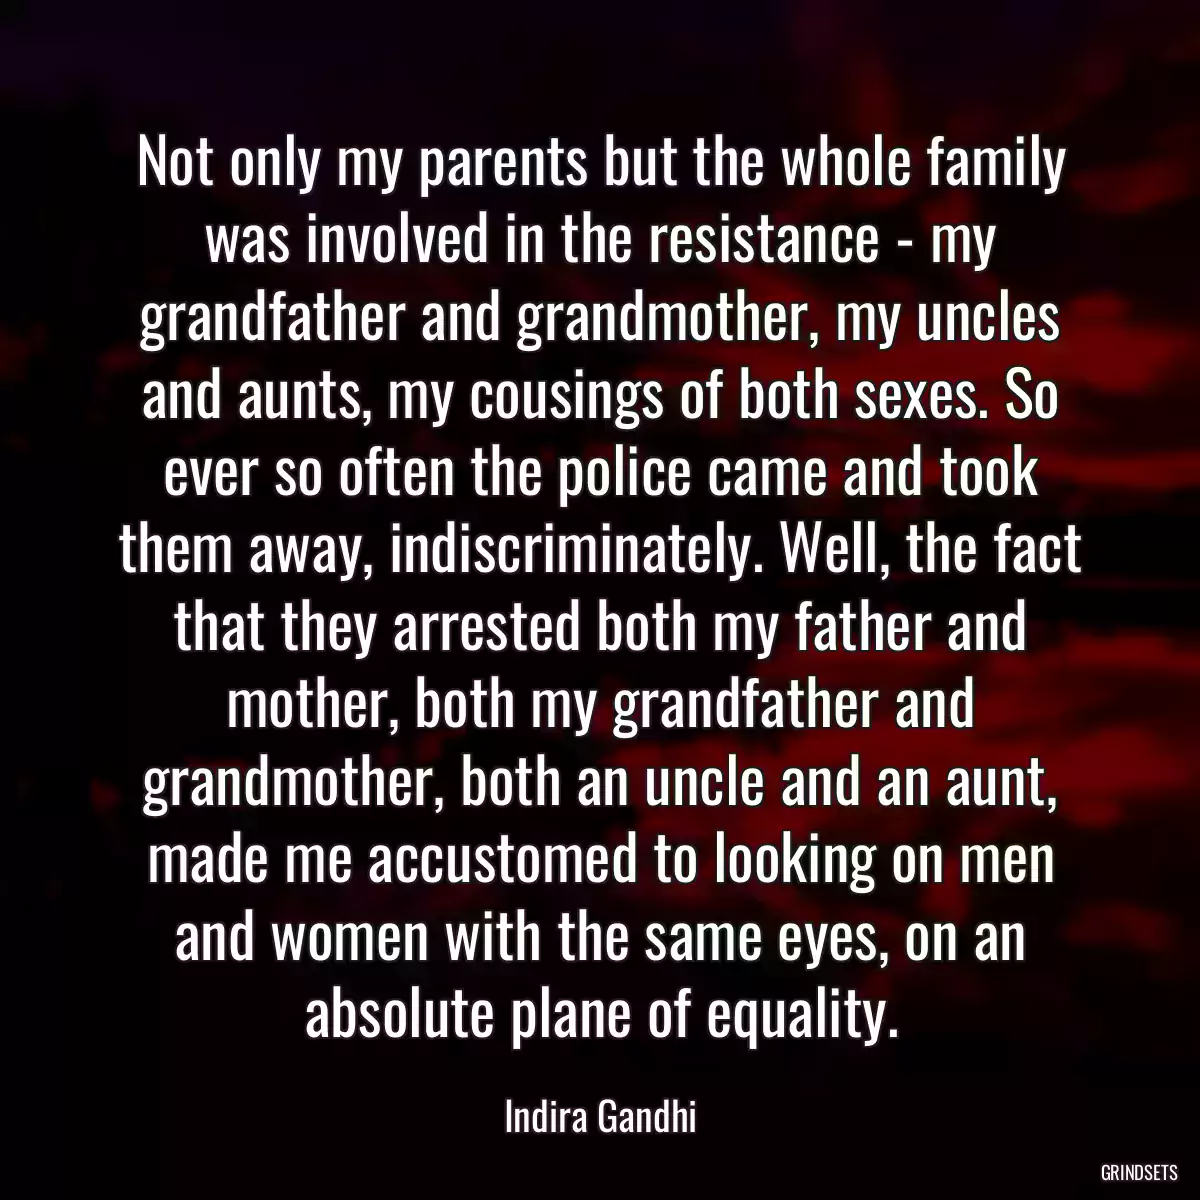 Not only my parents but the whole family was involved in the resistance - my grandfather and grandmother, my uncles and aunts, my cousings of both sexes. So ever so often the police came and took them away, indiscriminately. Well, the fact that they arrested both my father and mother, both my grandfather and grandmother, both an uncle and an aunt, made me accustomed to looking on men and women with the same eyes, on an absolute plane of equality.